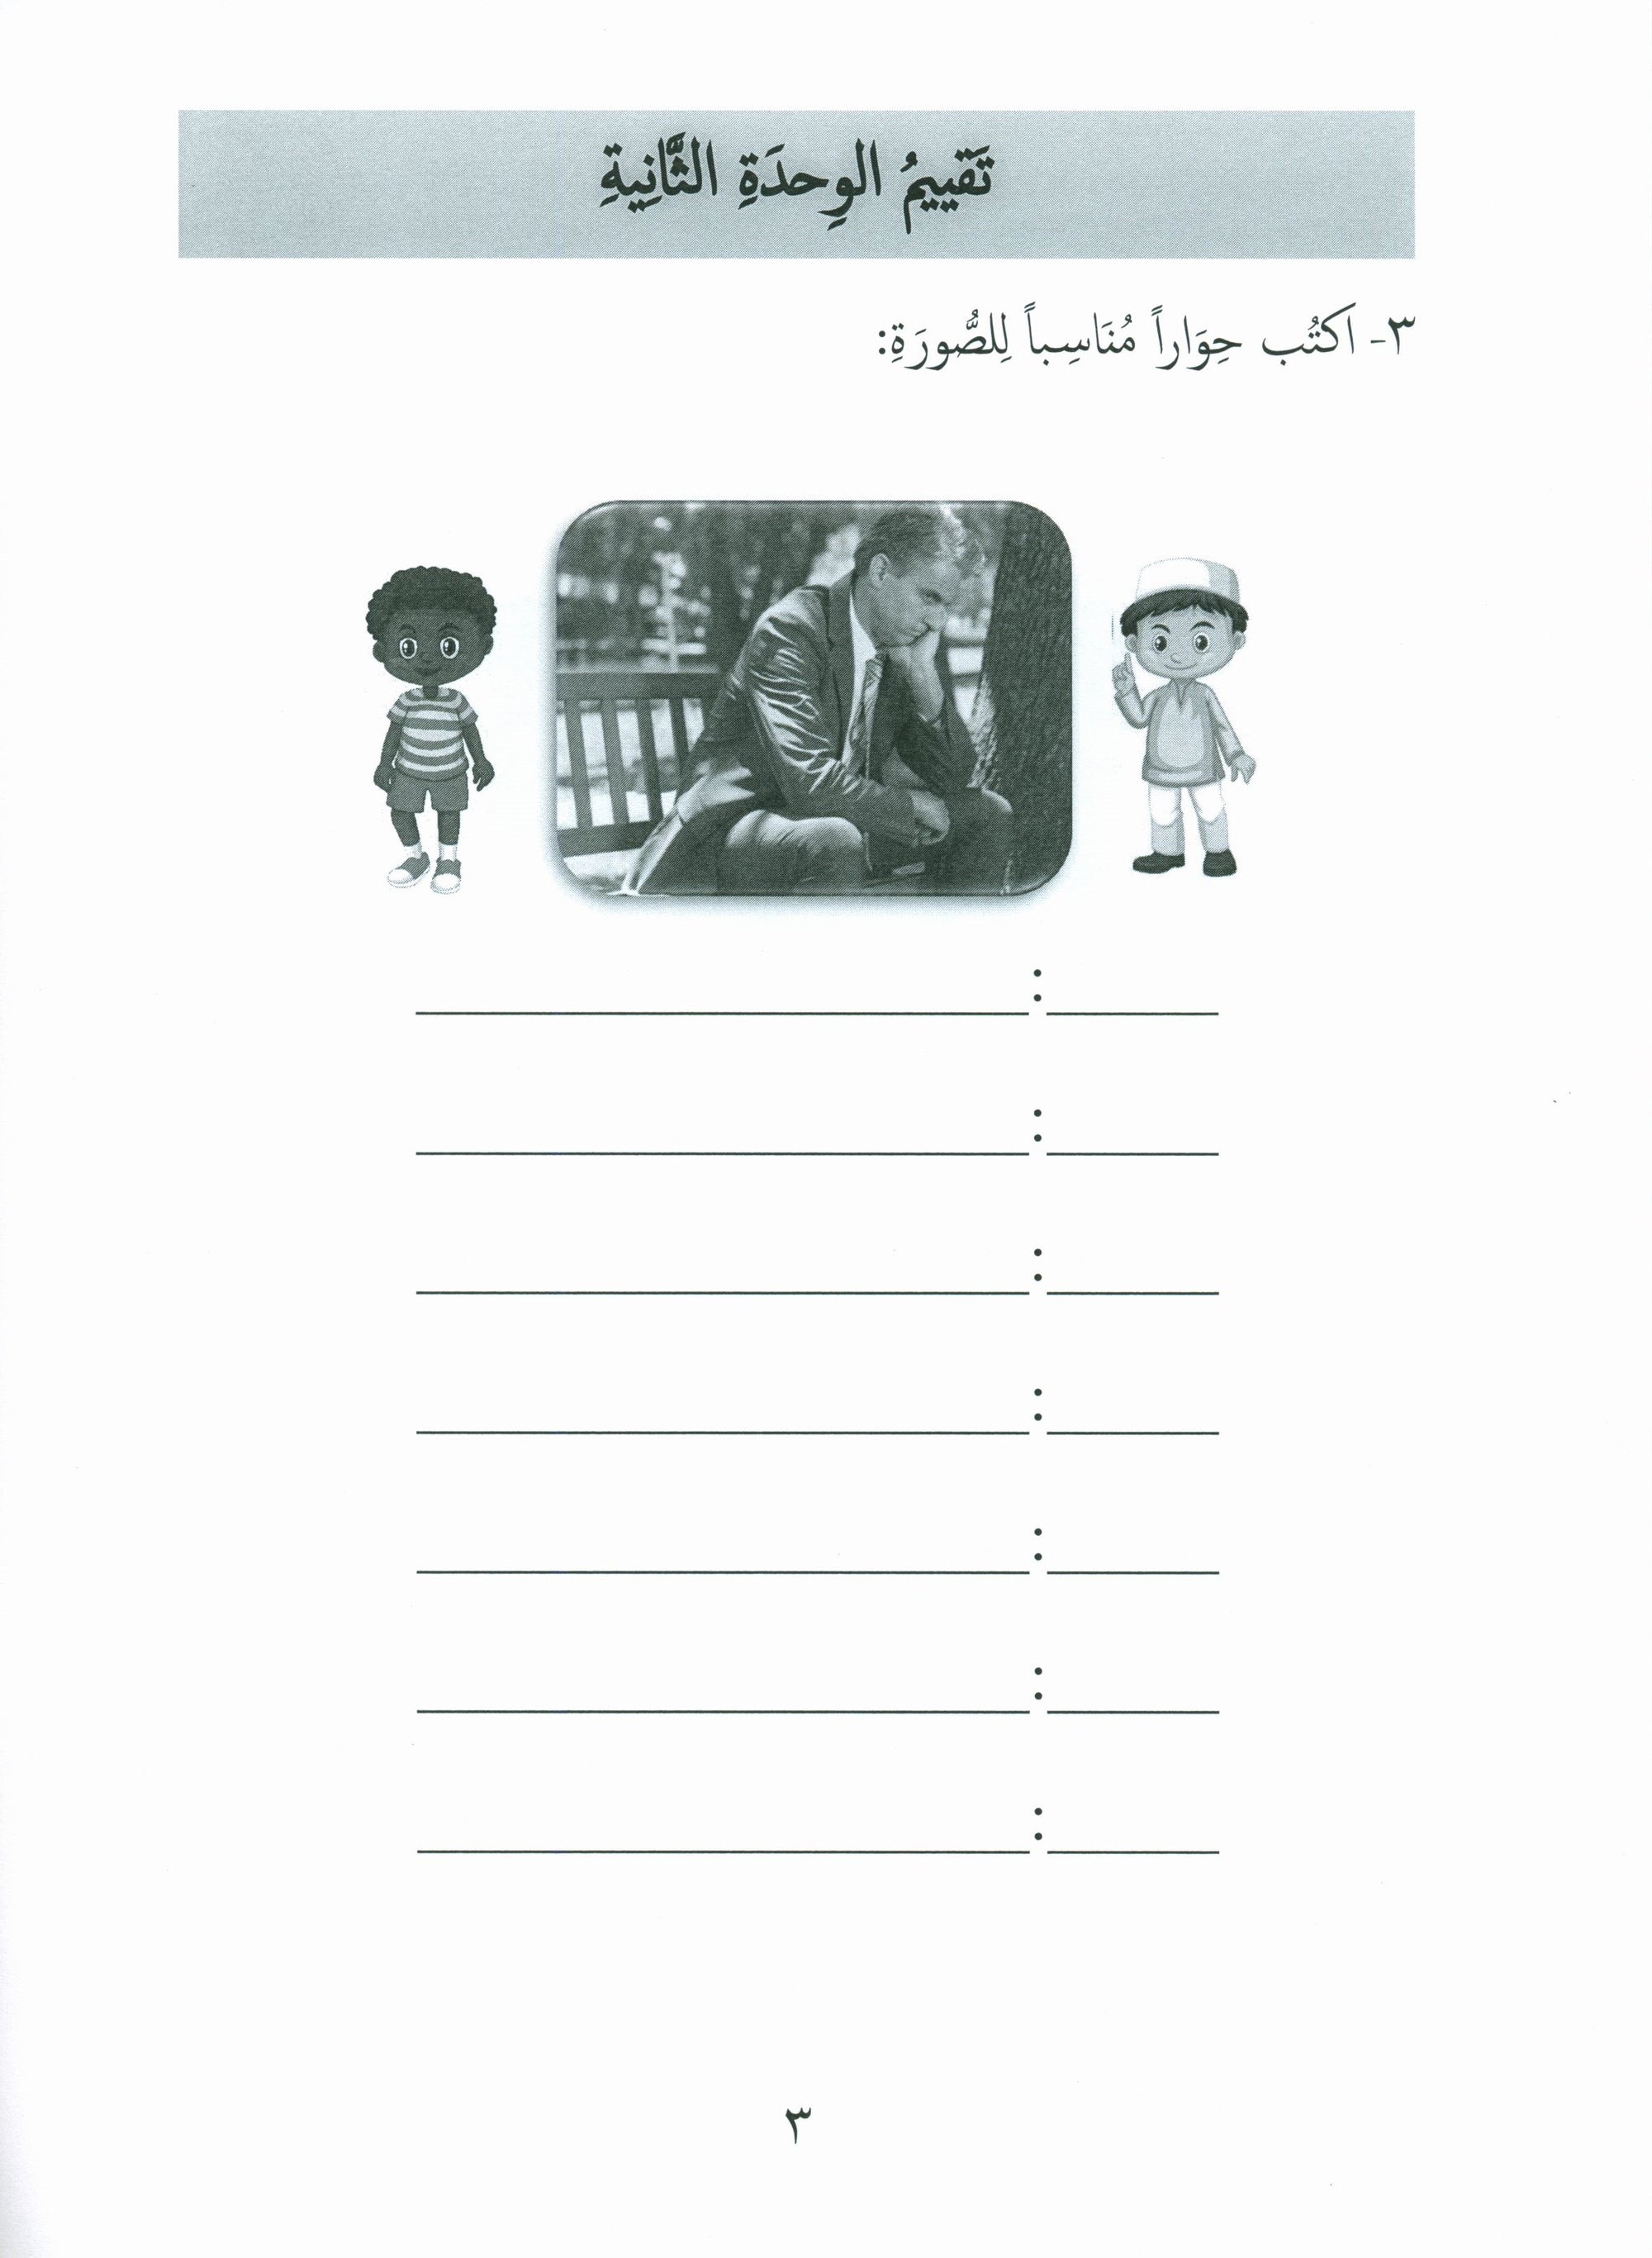 Our Language Is Our Pride Assessment Level 7 لغتنا فخرنا